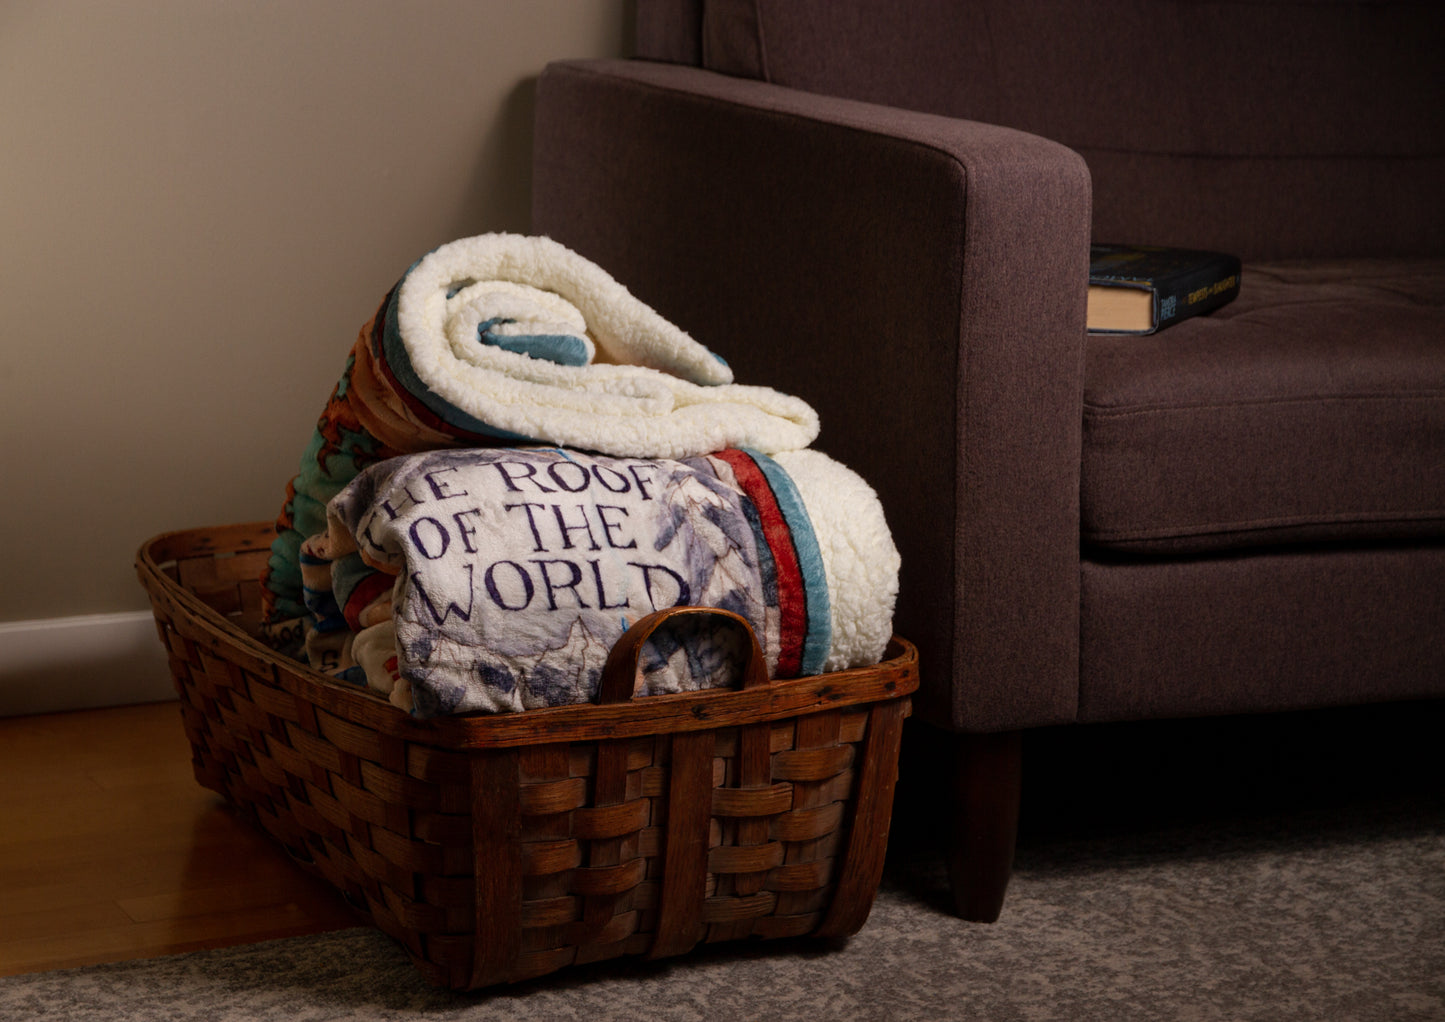 A folded Tortall blanket inside a wicker basket next to a couch. "THE ROOF OF THE WORLD" portion of the illustration is visible on the blanket.